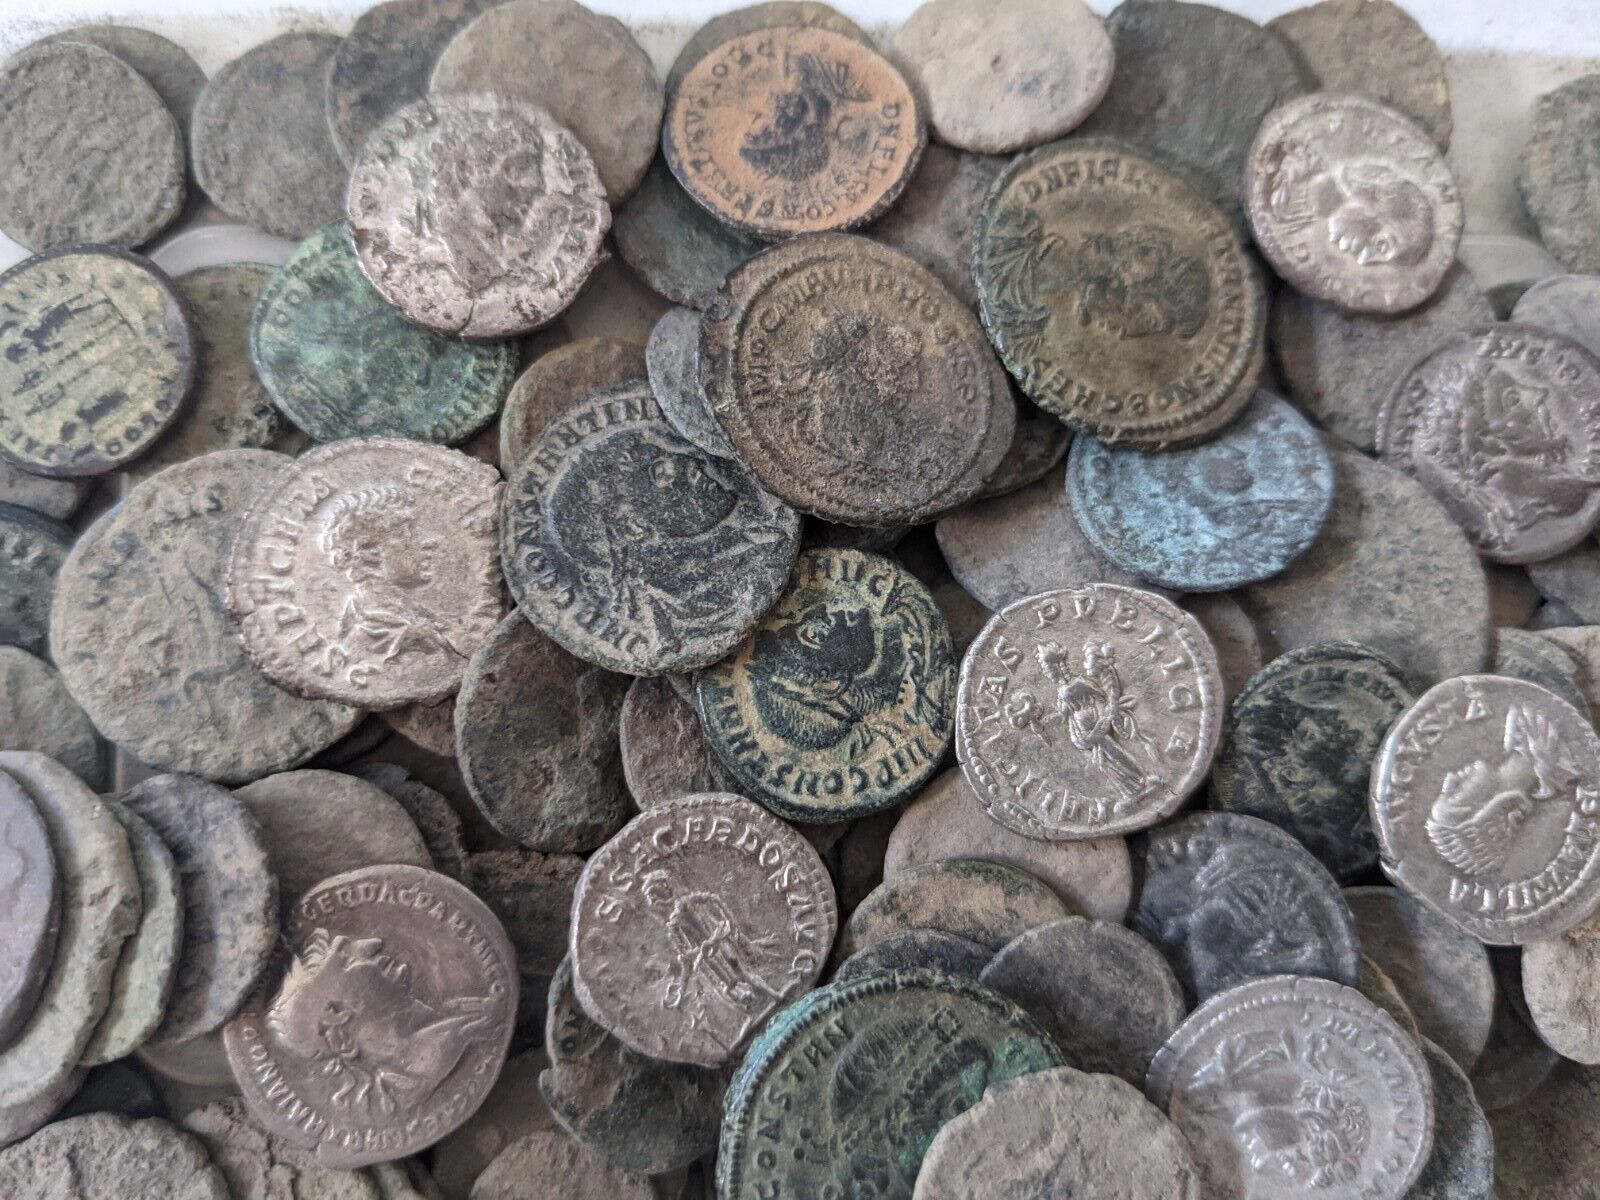 Uncleaned Coins and Coin Lots - Premium Ancient Coins